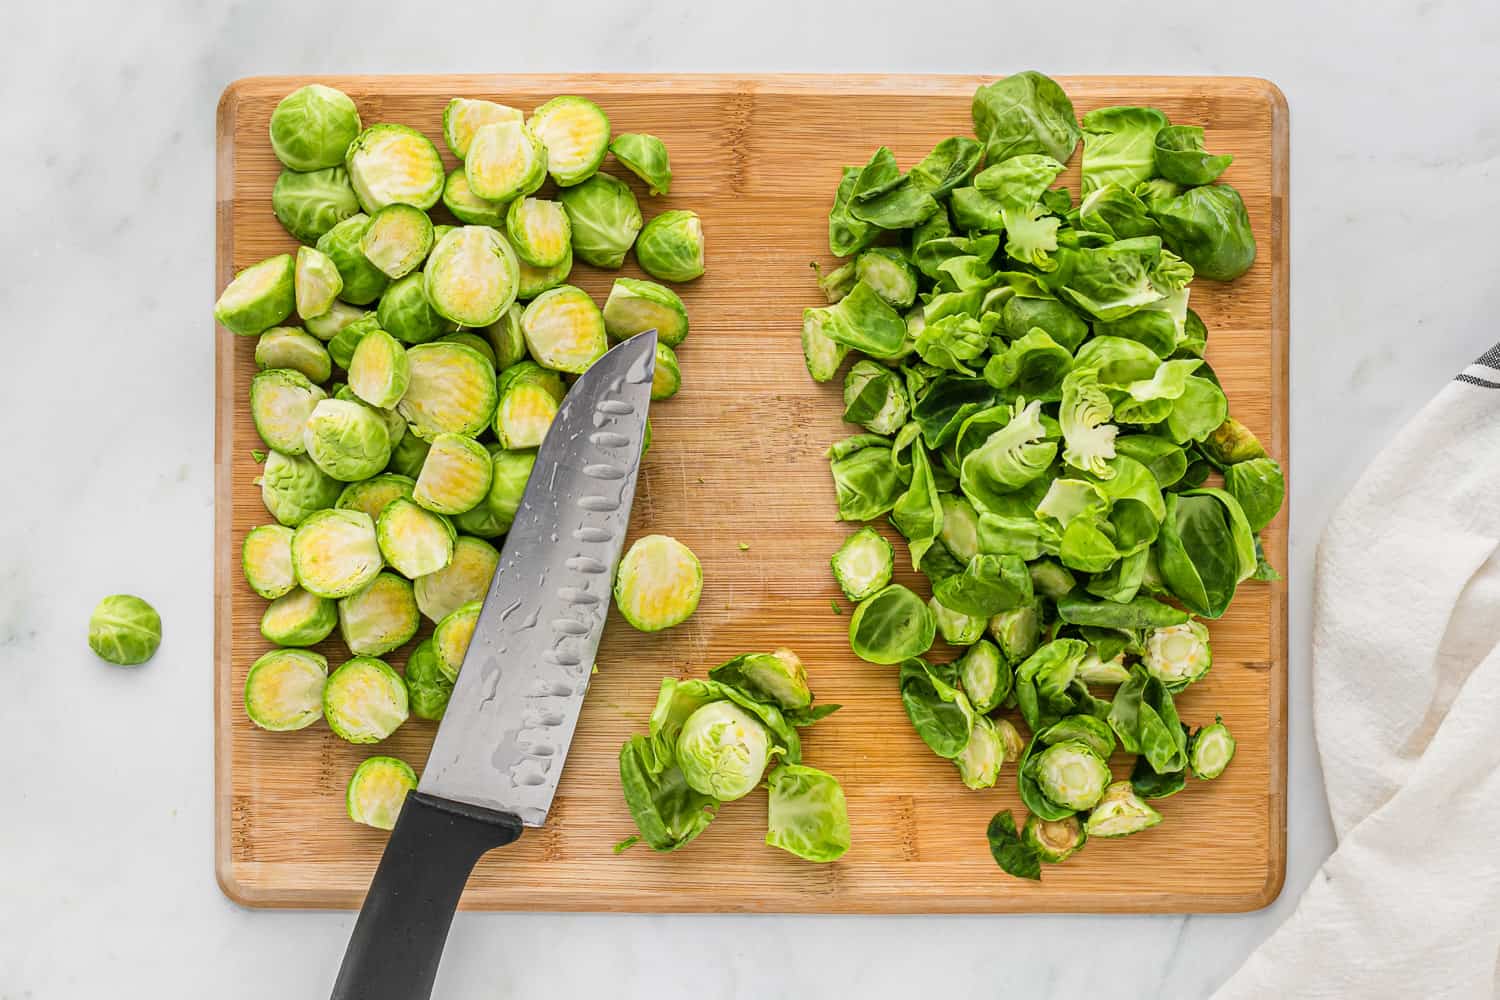 Brussel sprouts, trimmed, knife on cutting board.